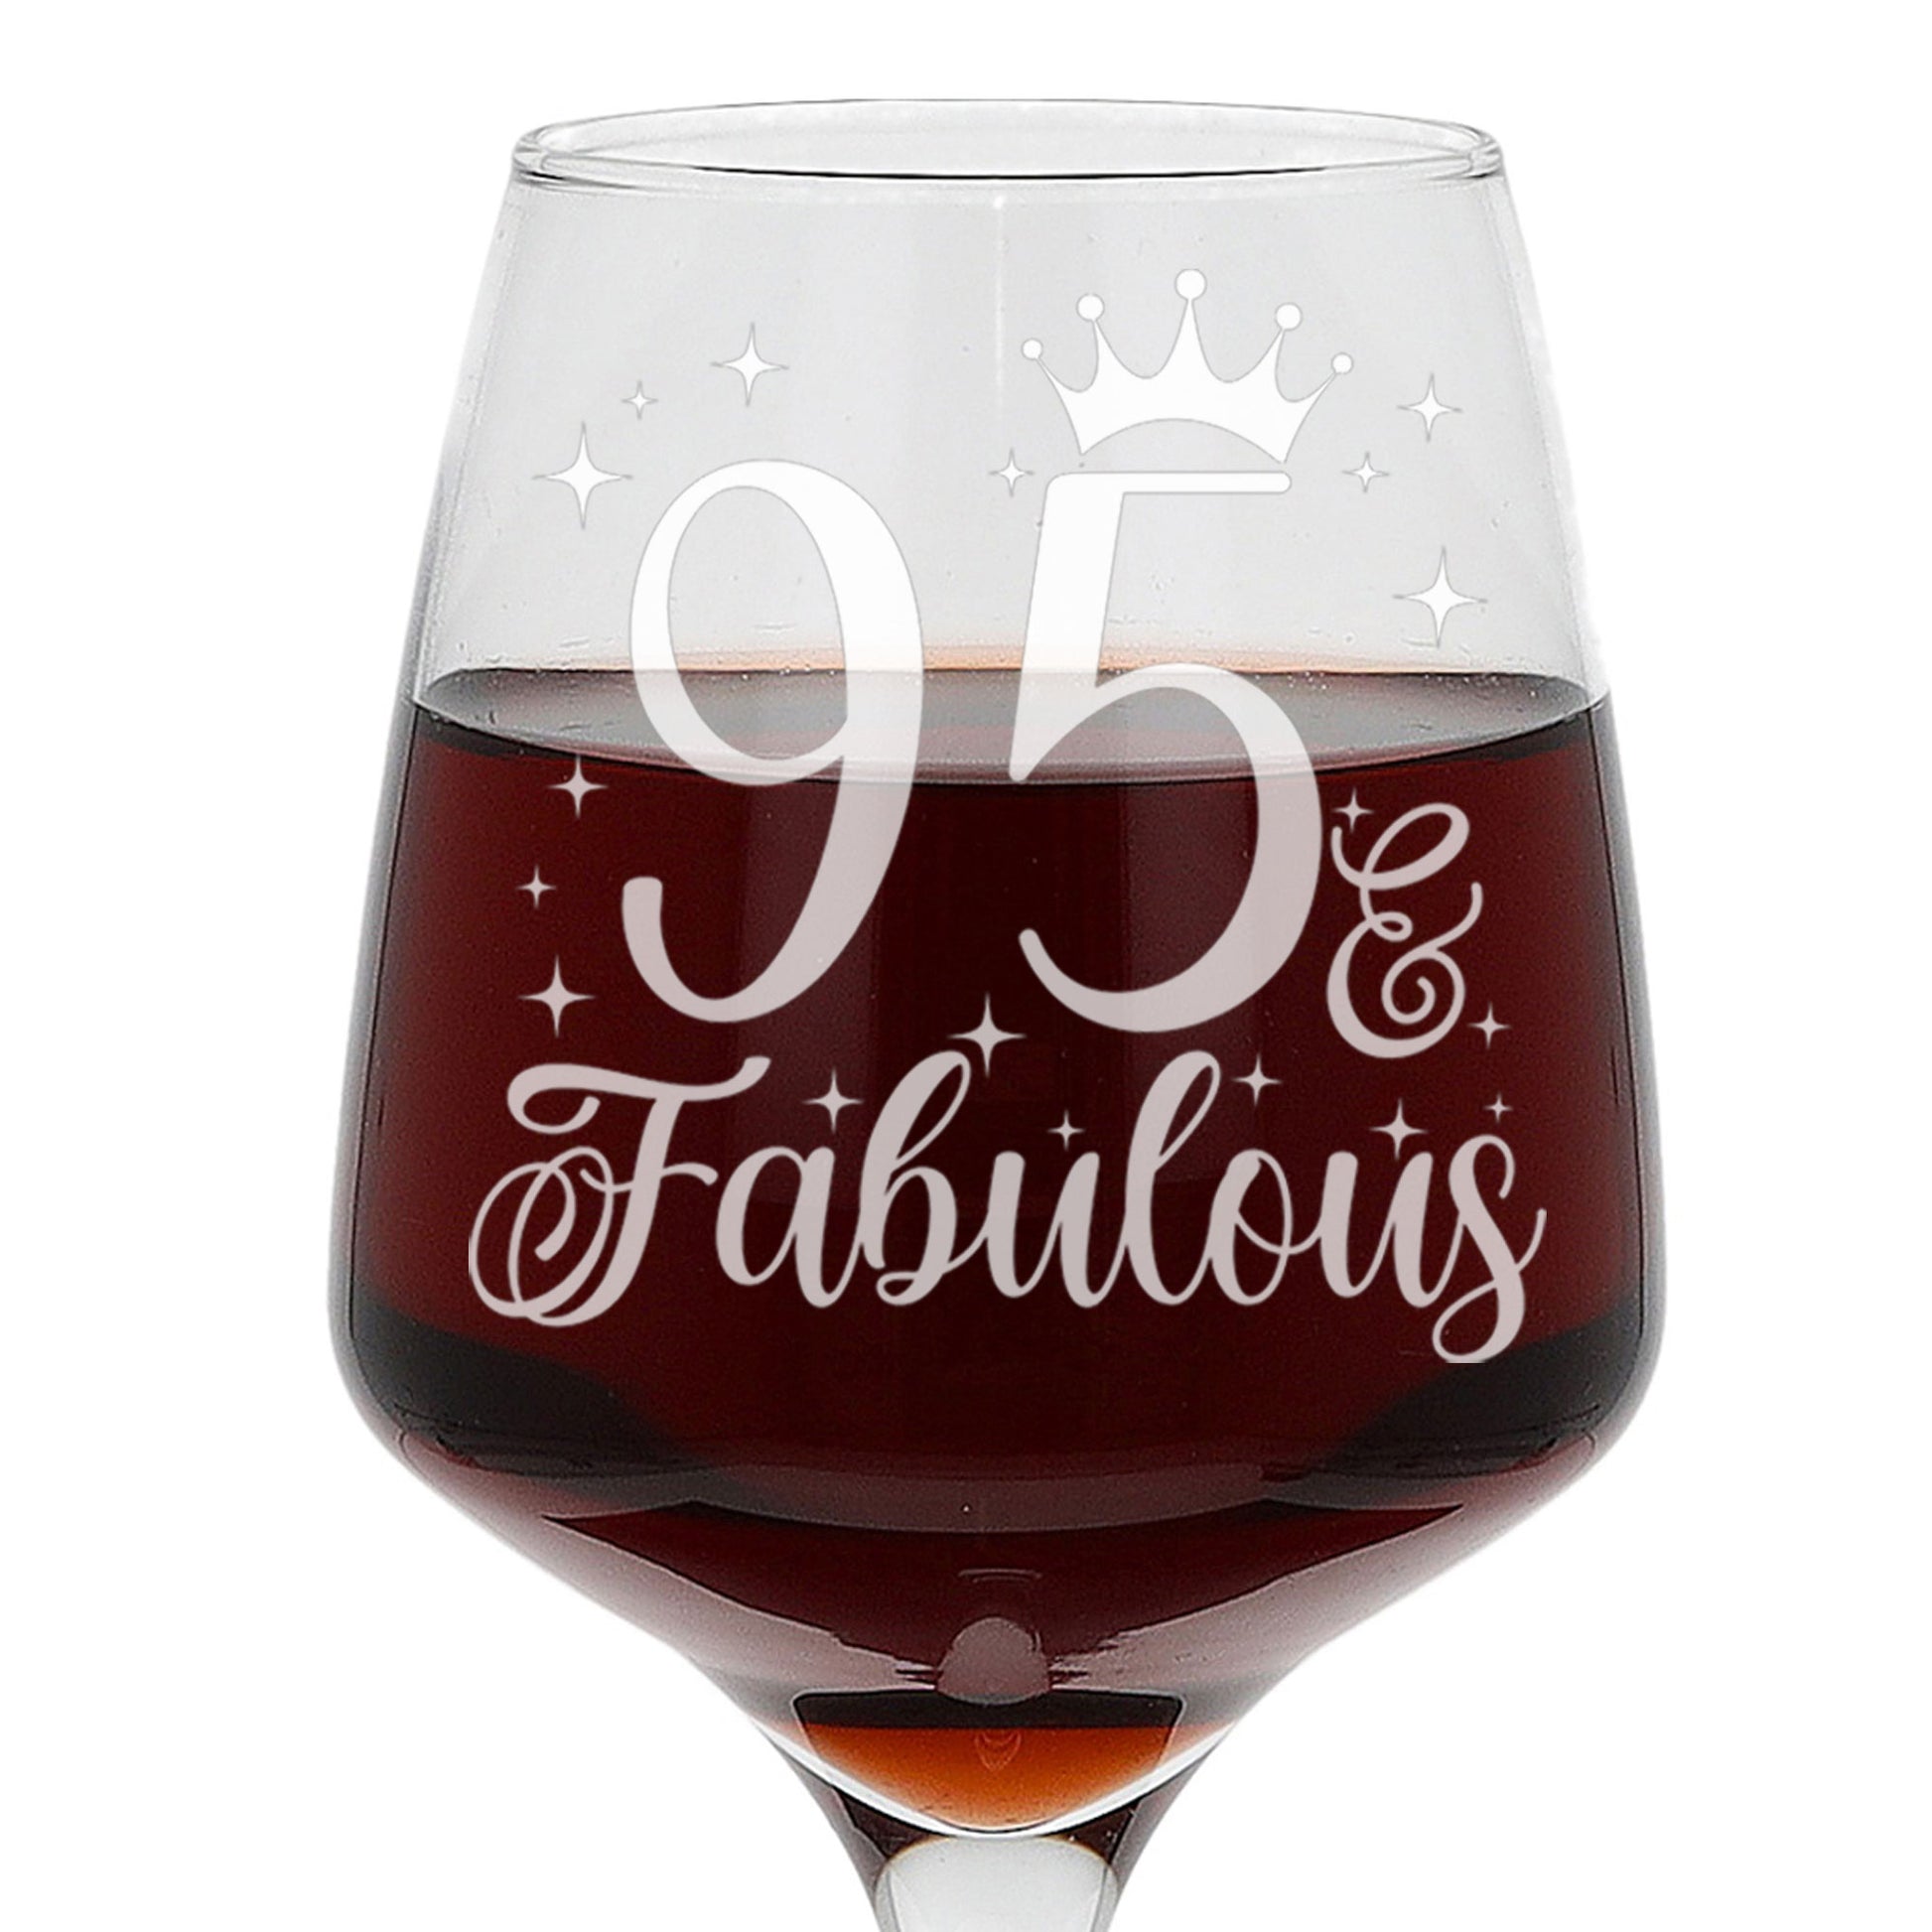 95 & Fabulous 95th Birthday Gift Engraved Wine Glass and/or Coaster Set  - Always Looking Good -   